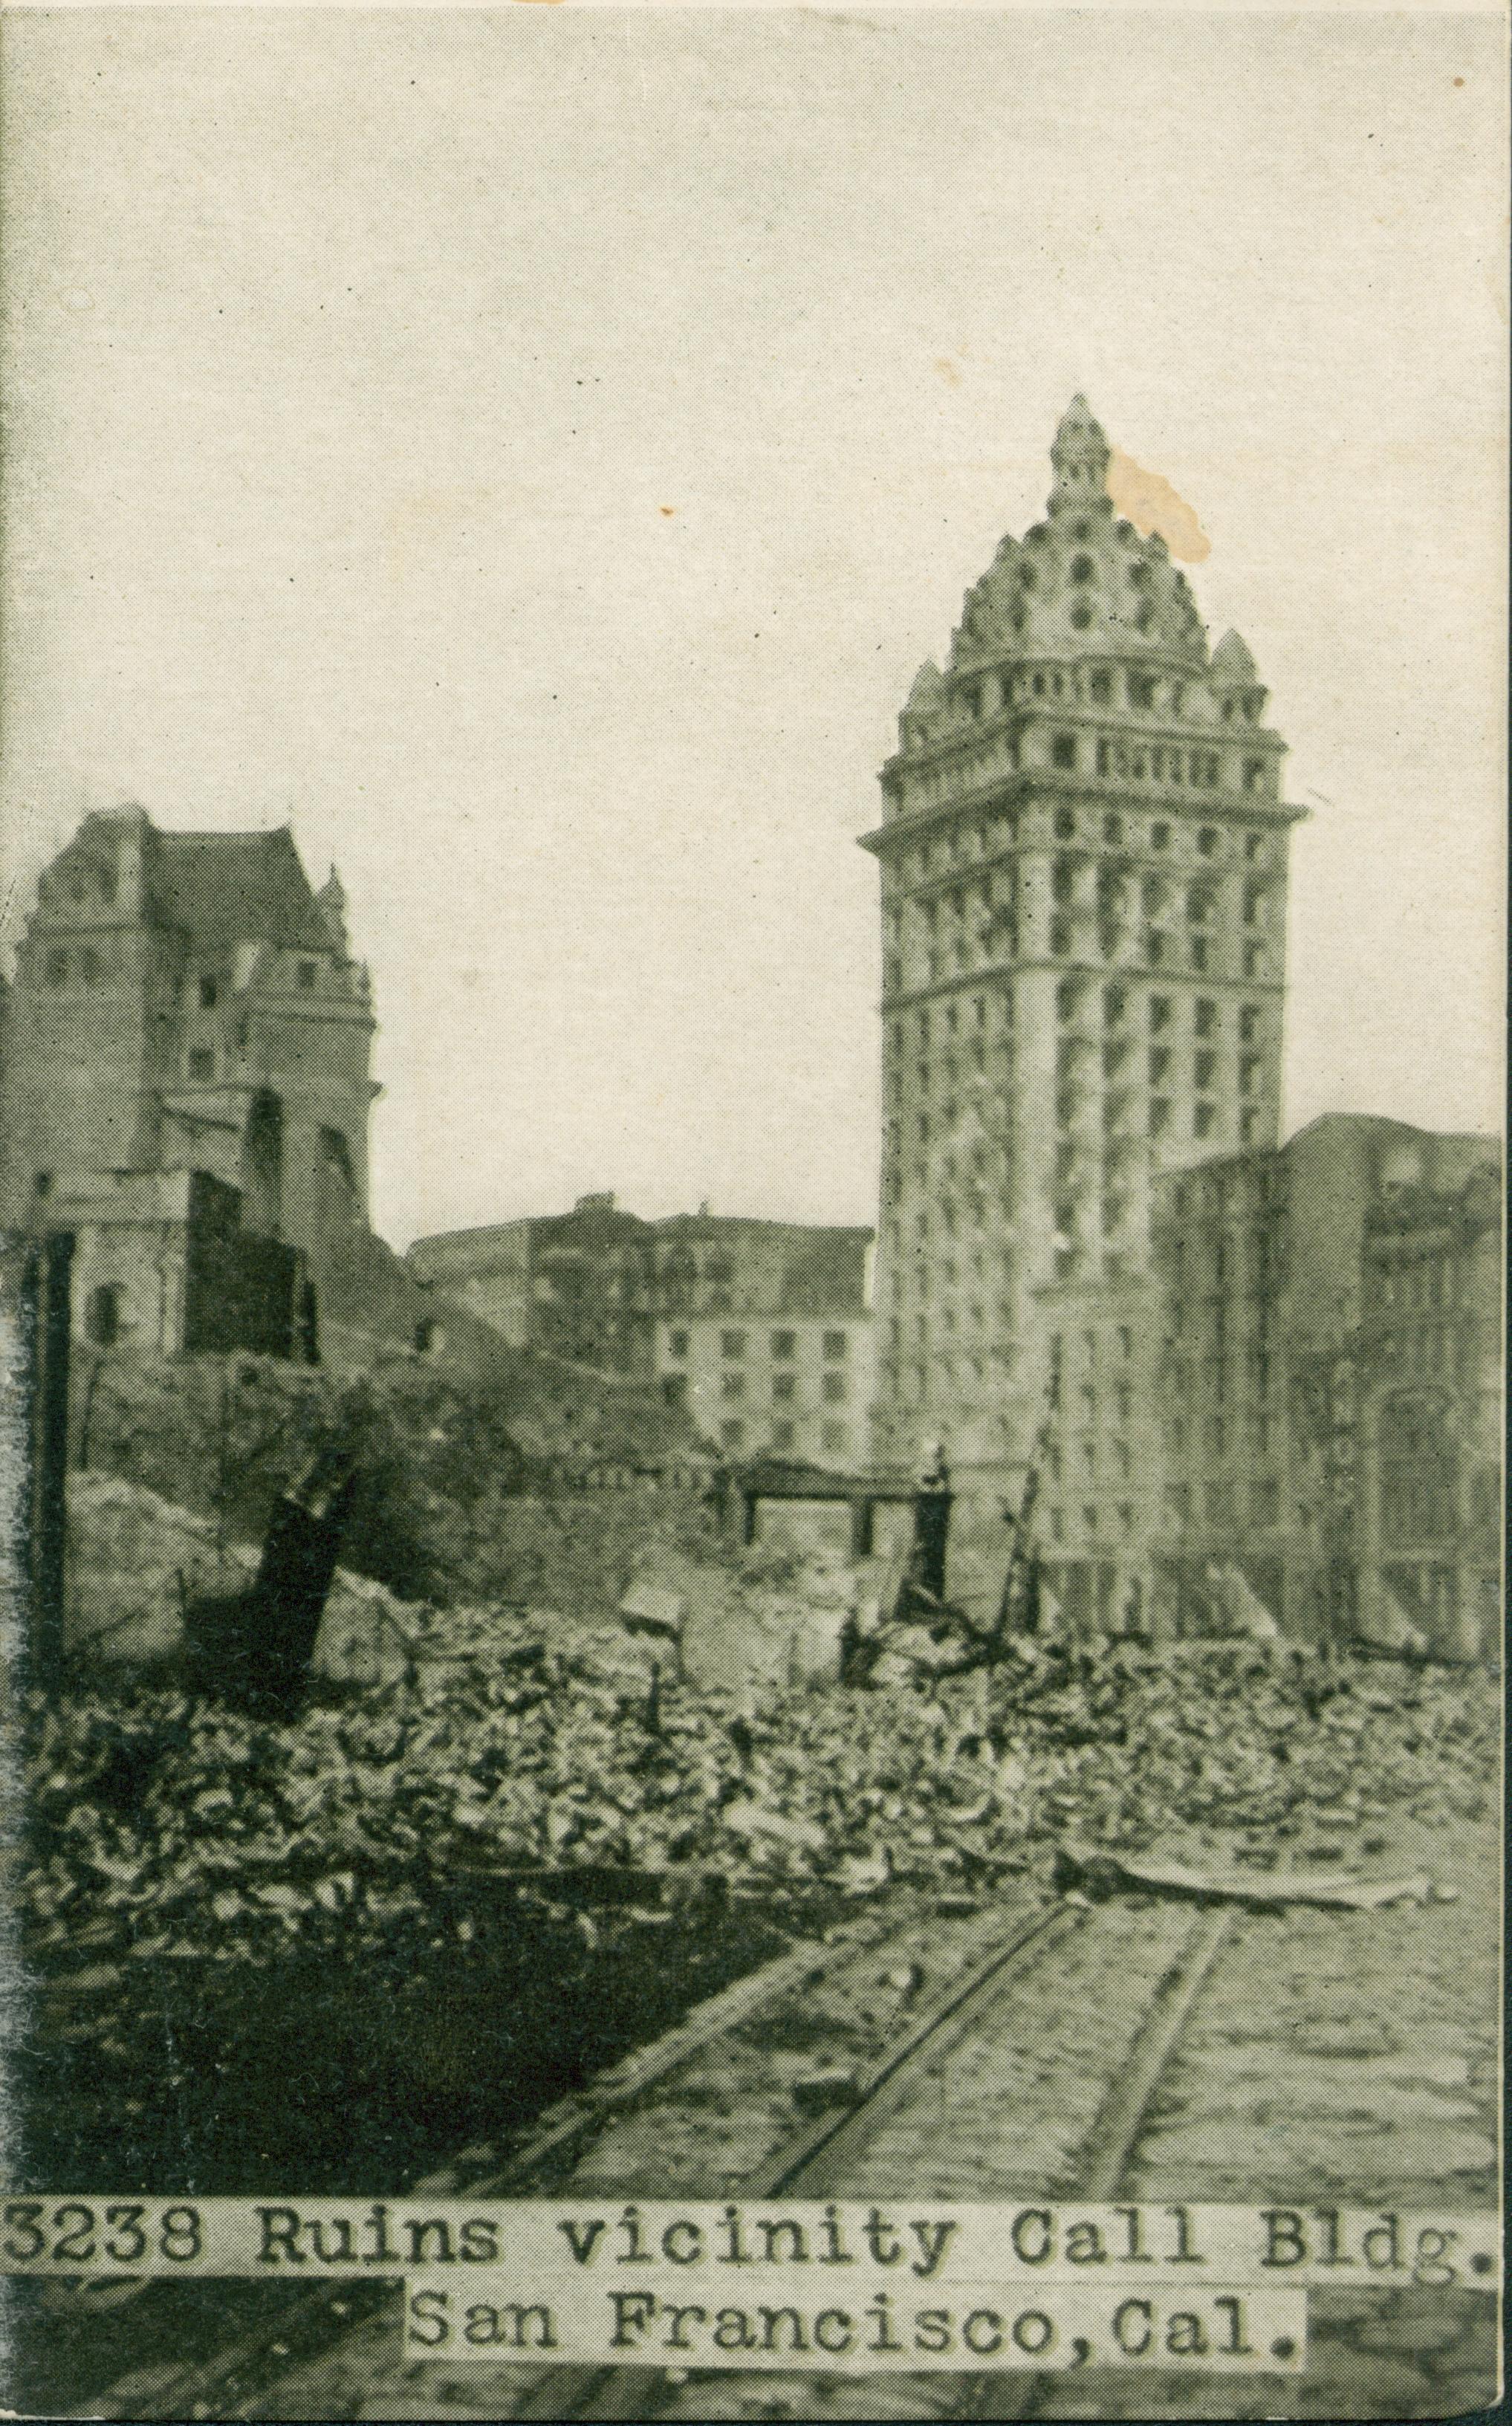 Shows a view of the ruins of the San Francisco Call Building, along with several other buildings